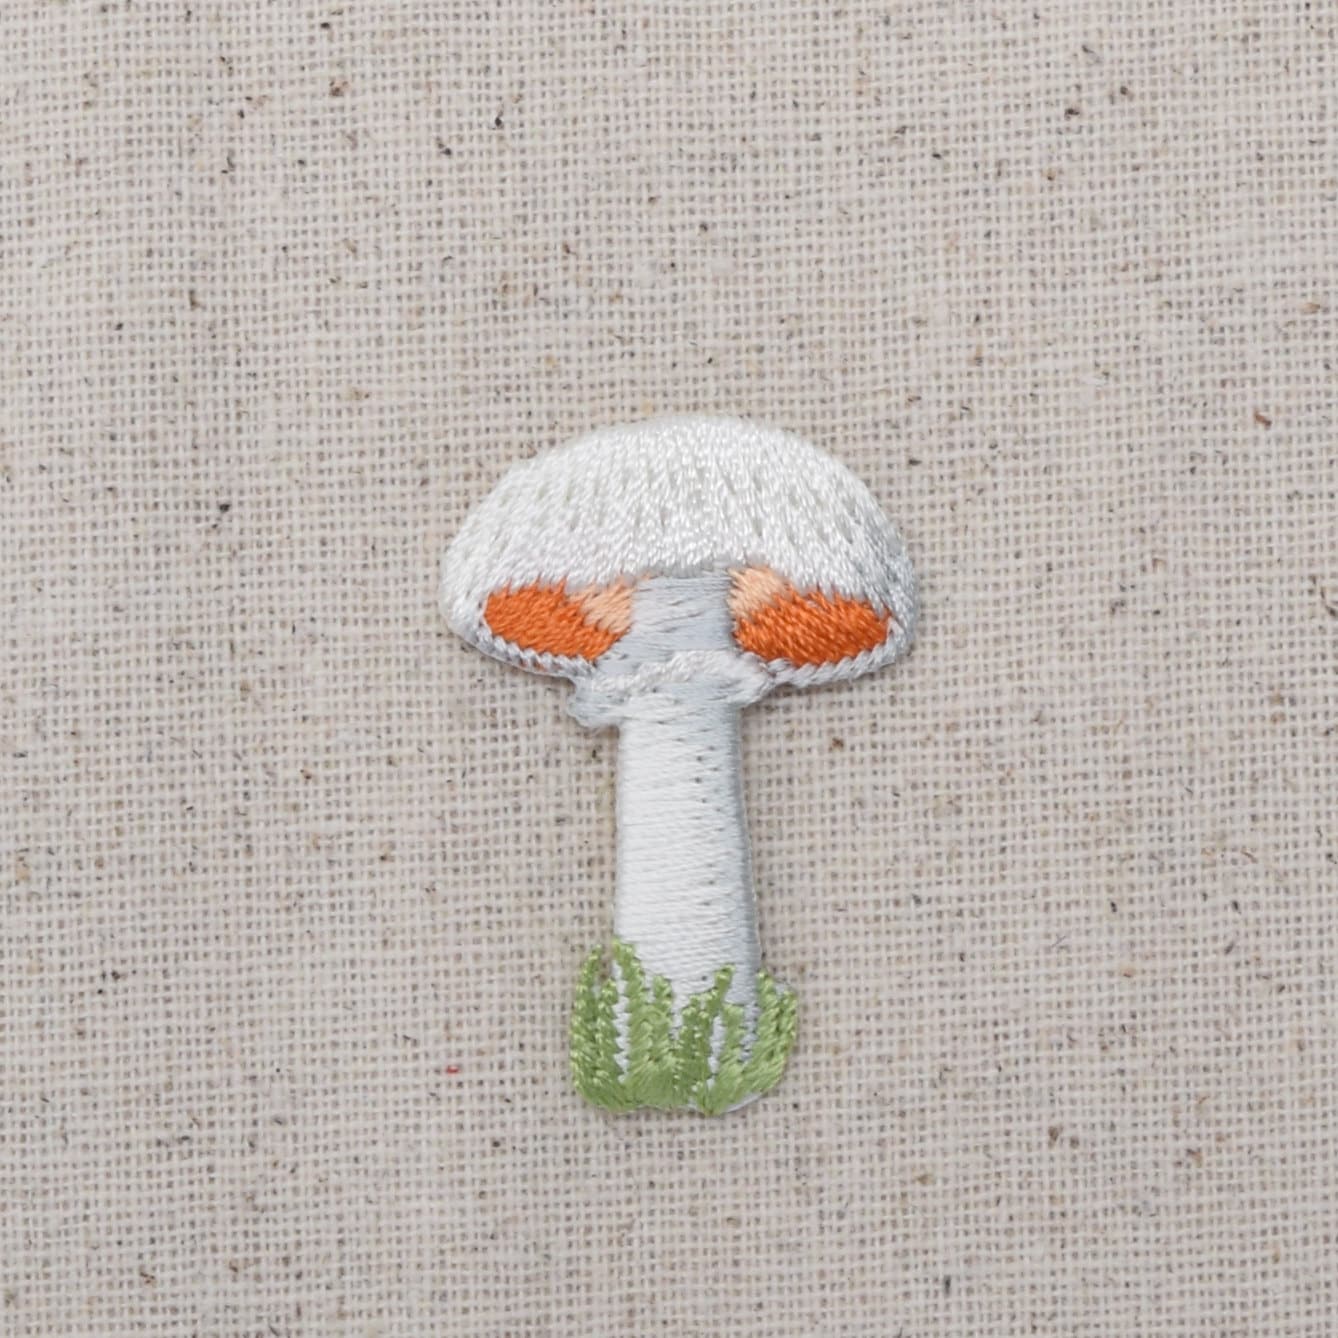 Mushroom - White Cap Fungi - Toadstool - Vegetable - Small - Embroidered Patch -  Iron on Applique - 150361A